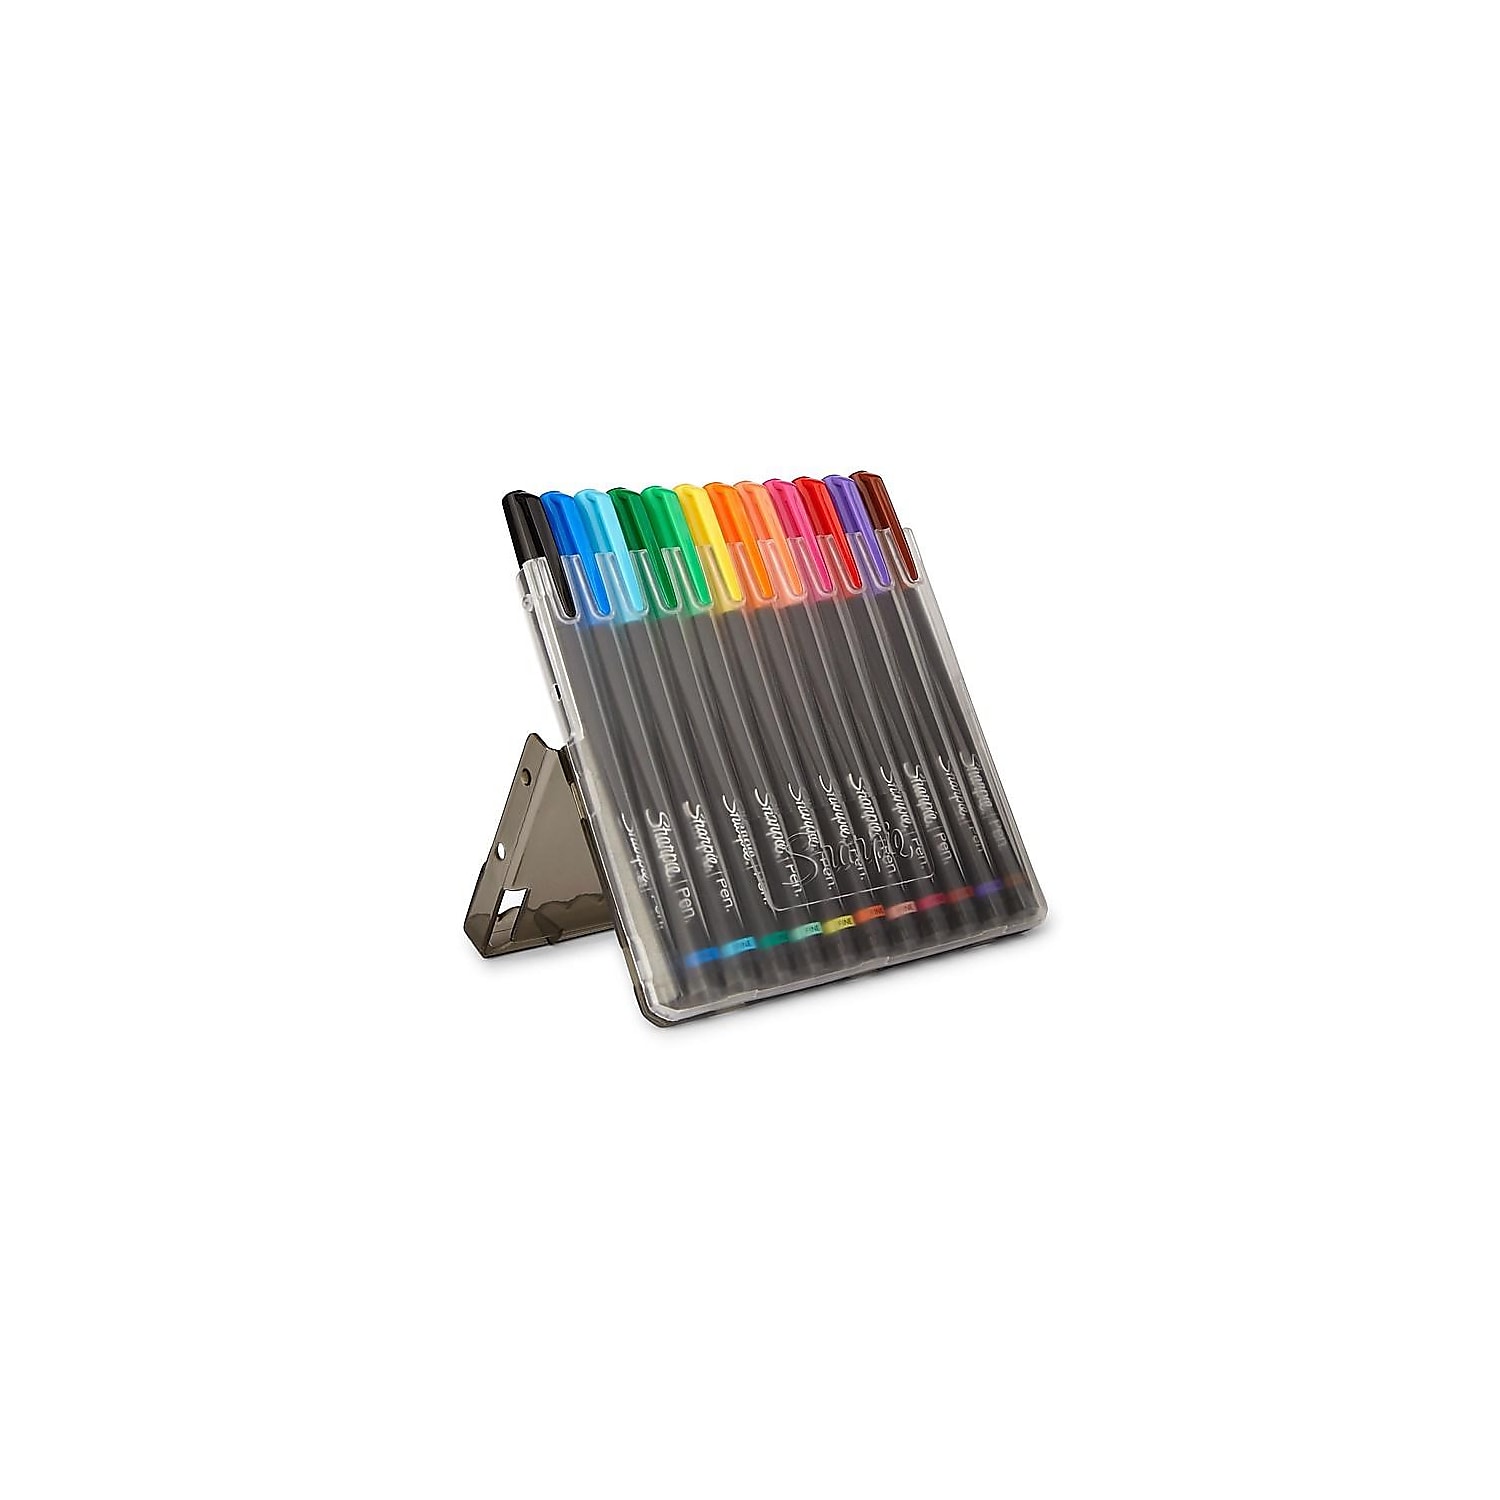 Sharpie Assorted Fine Point Drawing Pen Set, 12 Pieces - image 2 of 8